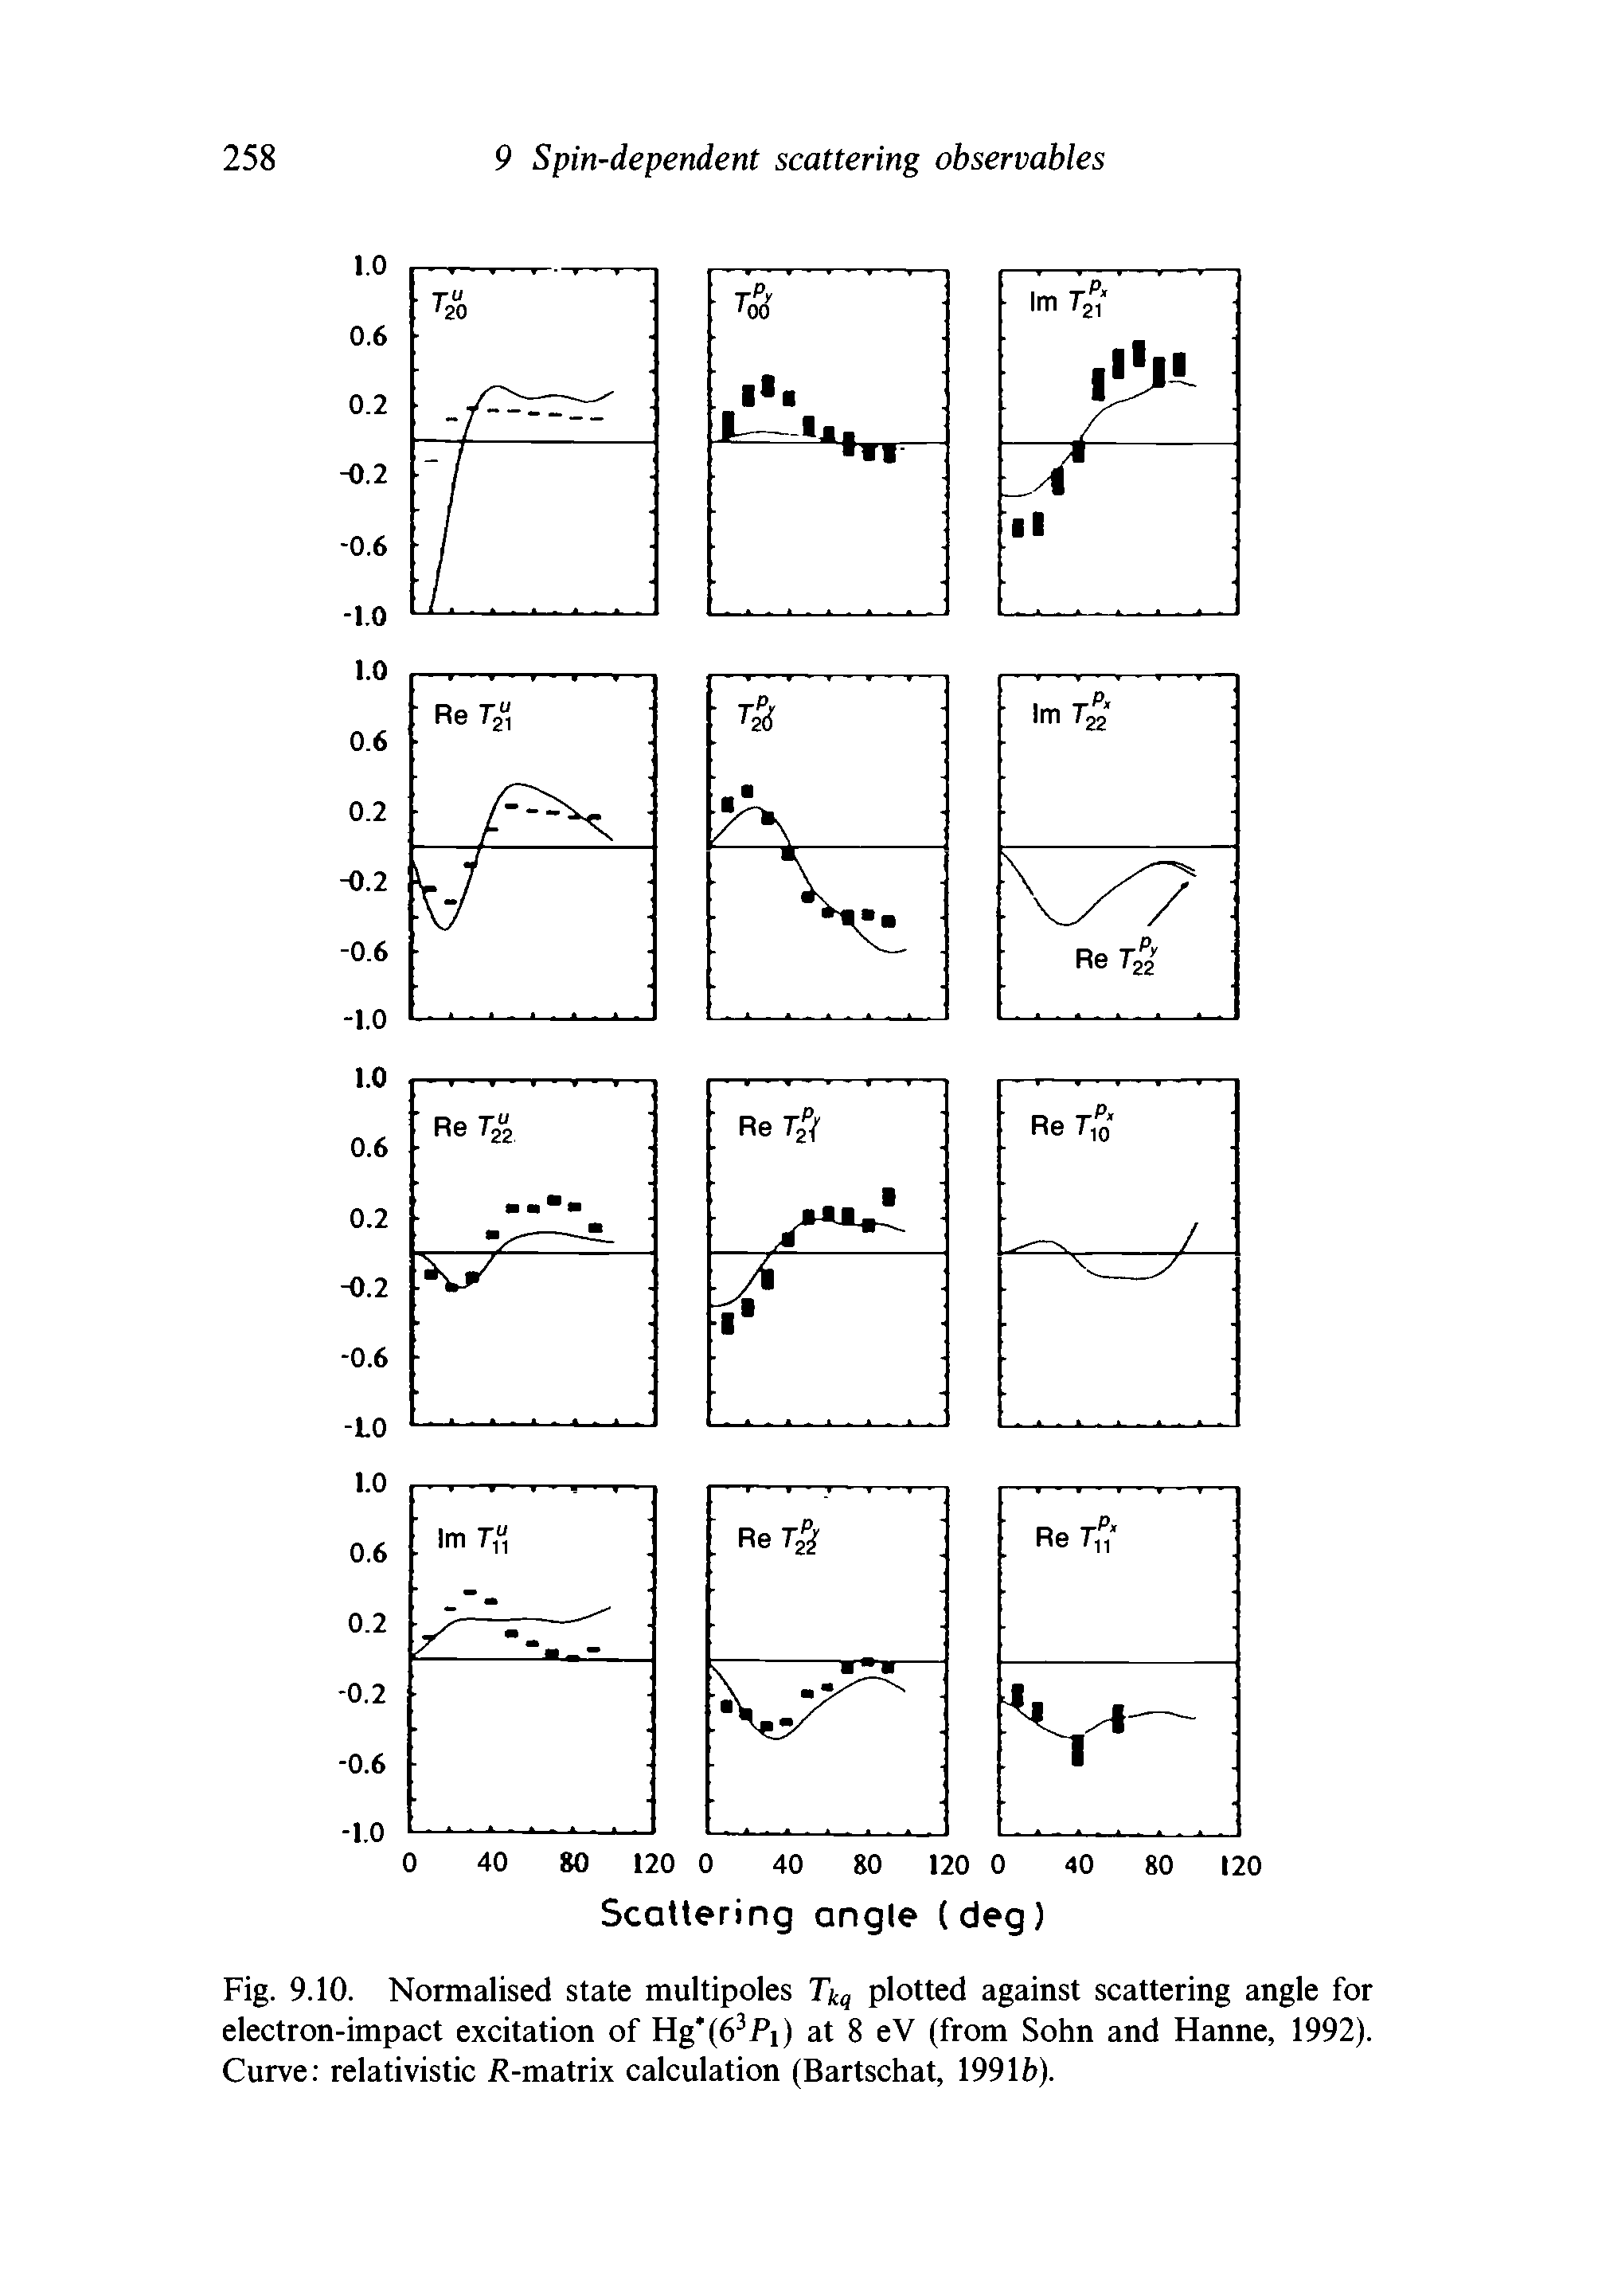 Fig. 9.10. Normalised state multipoles Tkq plotted against scattering angle for electron-impact excitation of Hg (6 Pi) at 8 eV (from Sohn and Hanne, 1992). Curve relativistic i -matrix calculation (Bartschat, 19911)).